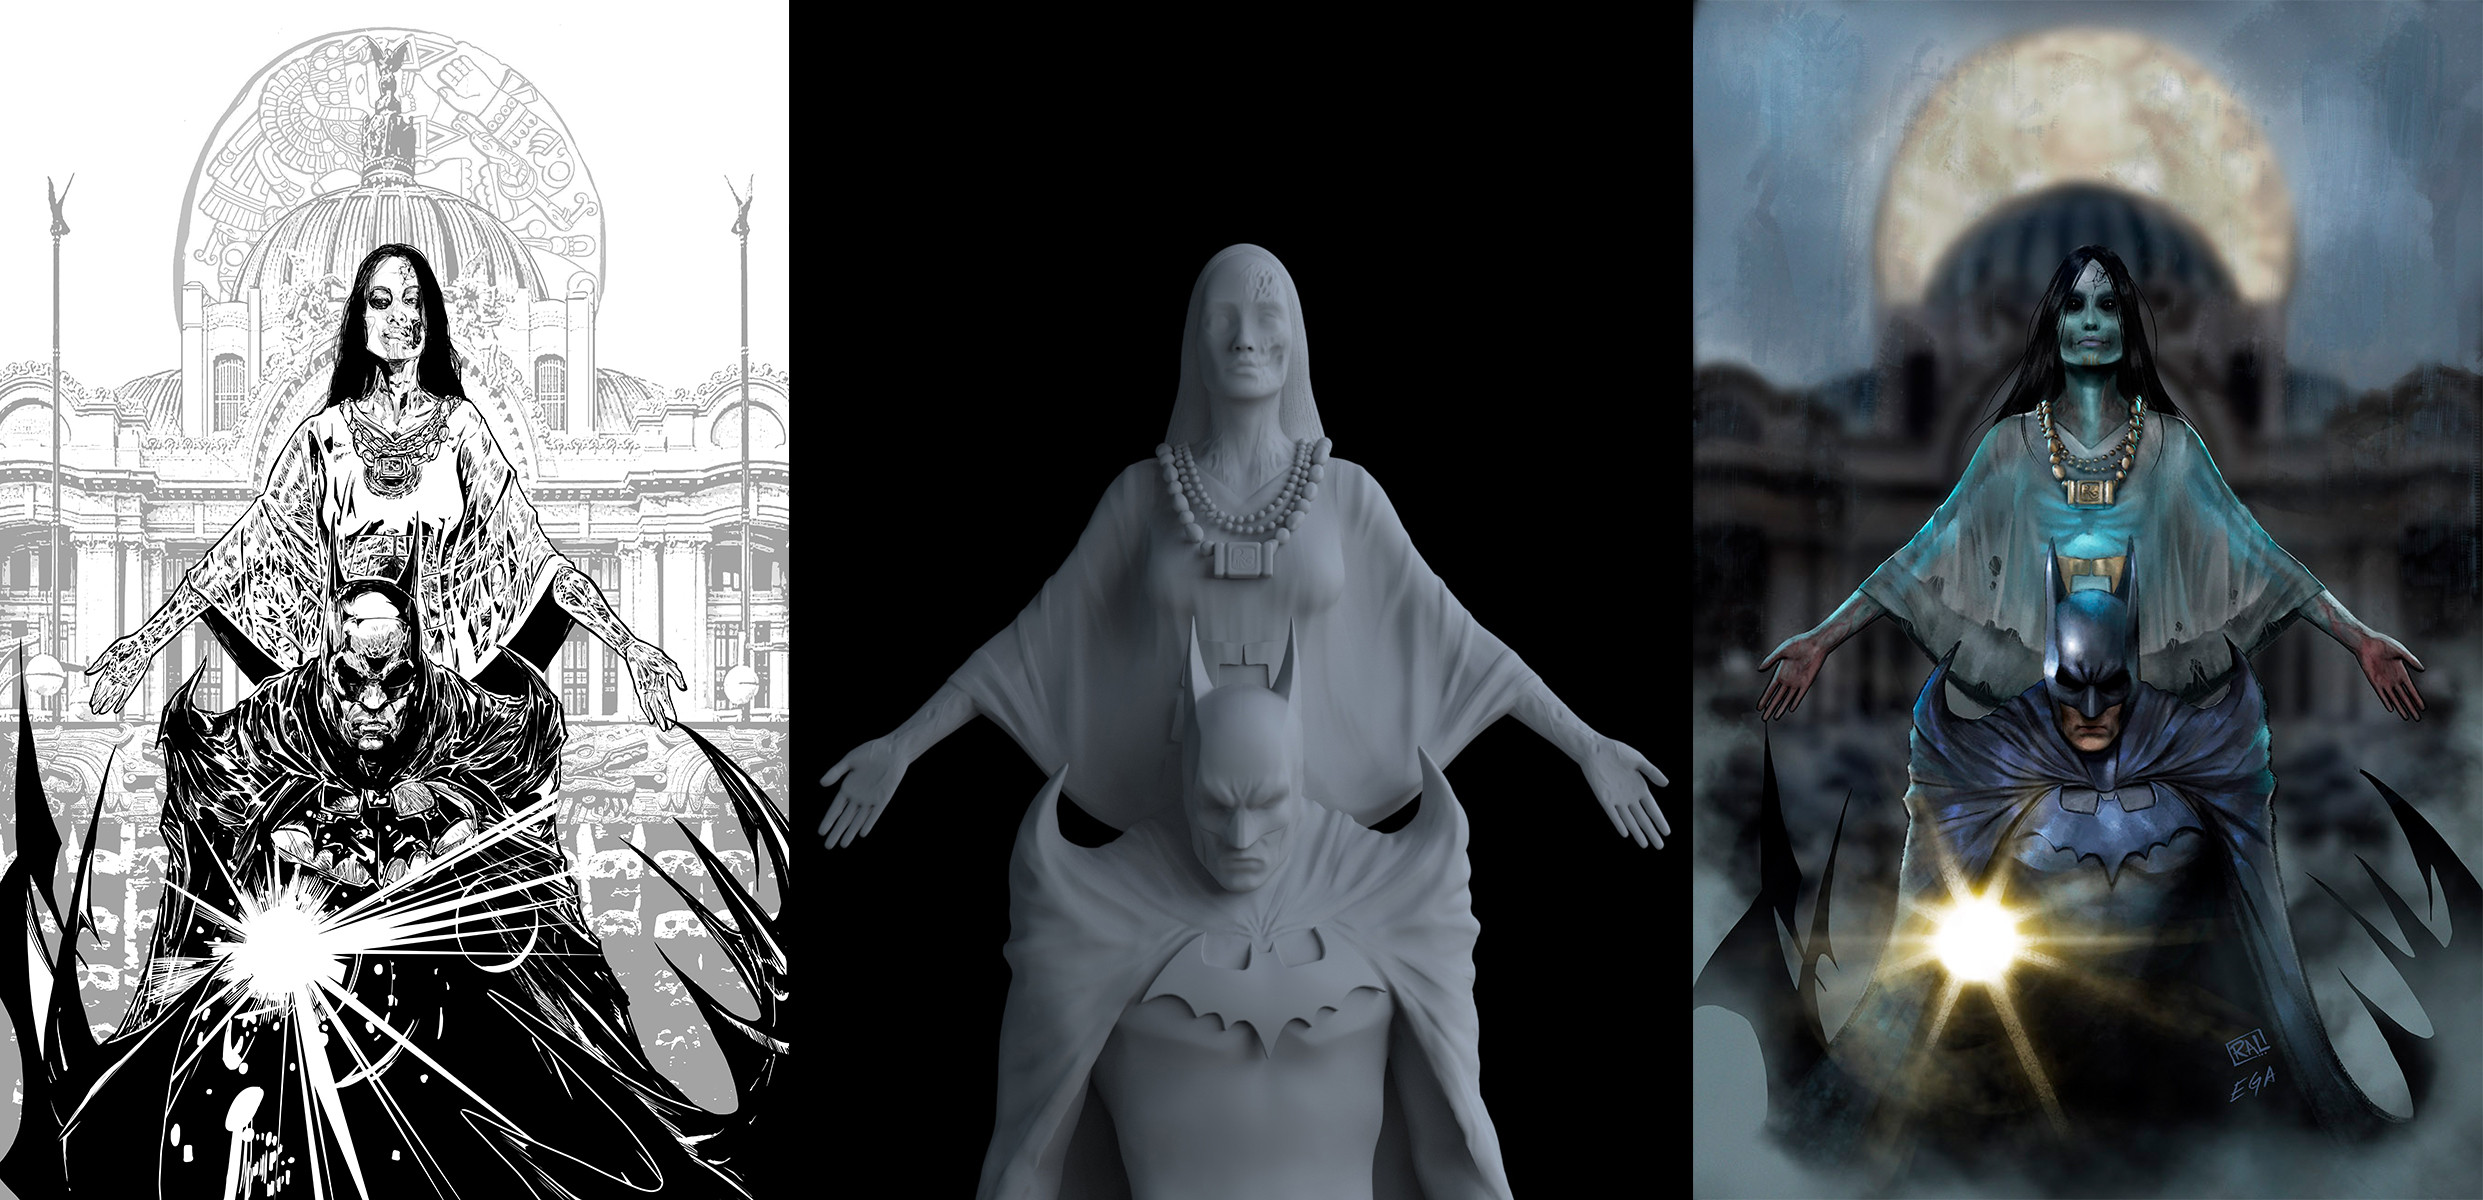 From left to right.

1.- Drawing from Raúl Valdés
2.- I made a quick sculpture to use it as base for the illustration.
3.- I digitaly painted the basic render to finish the cover.